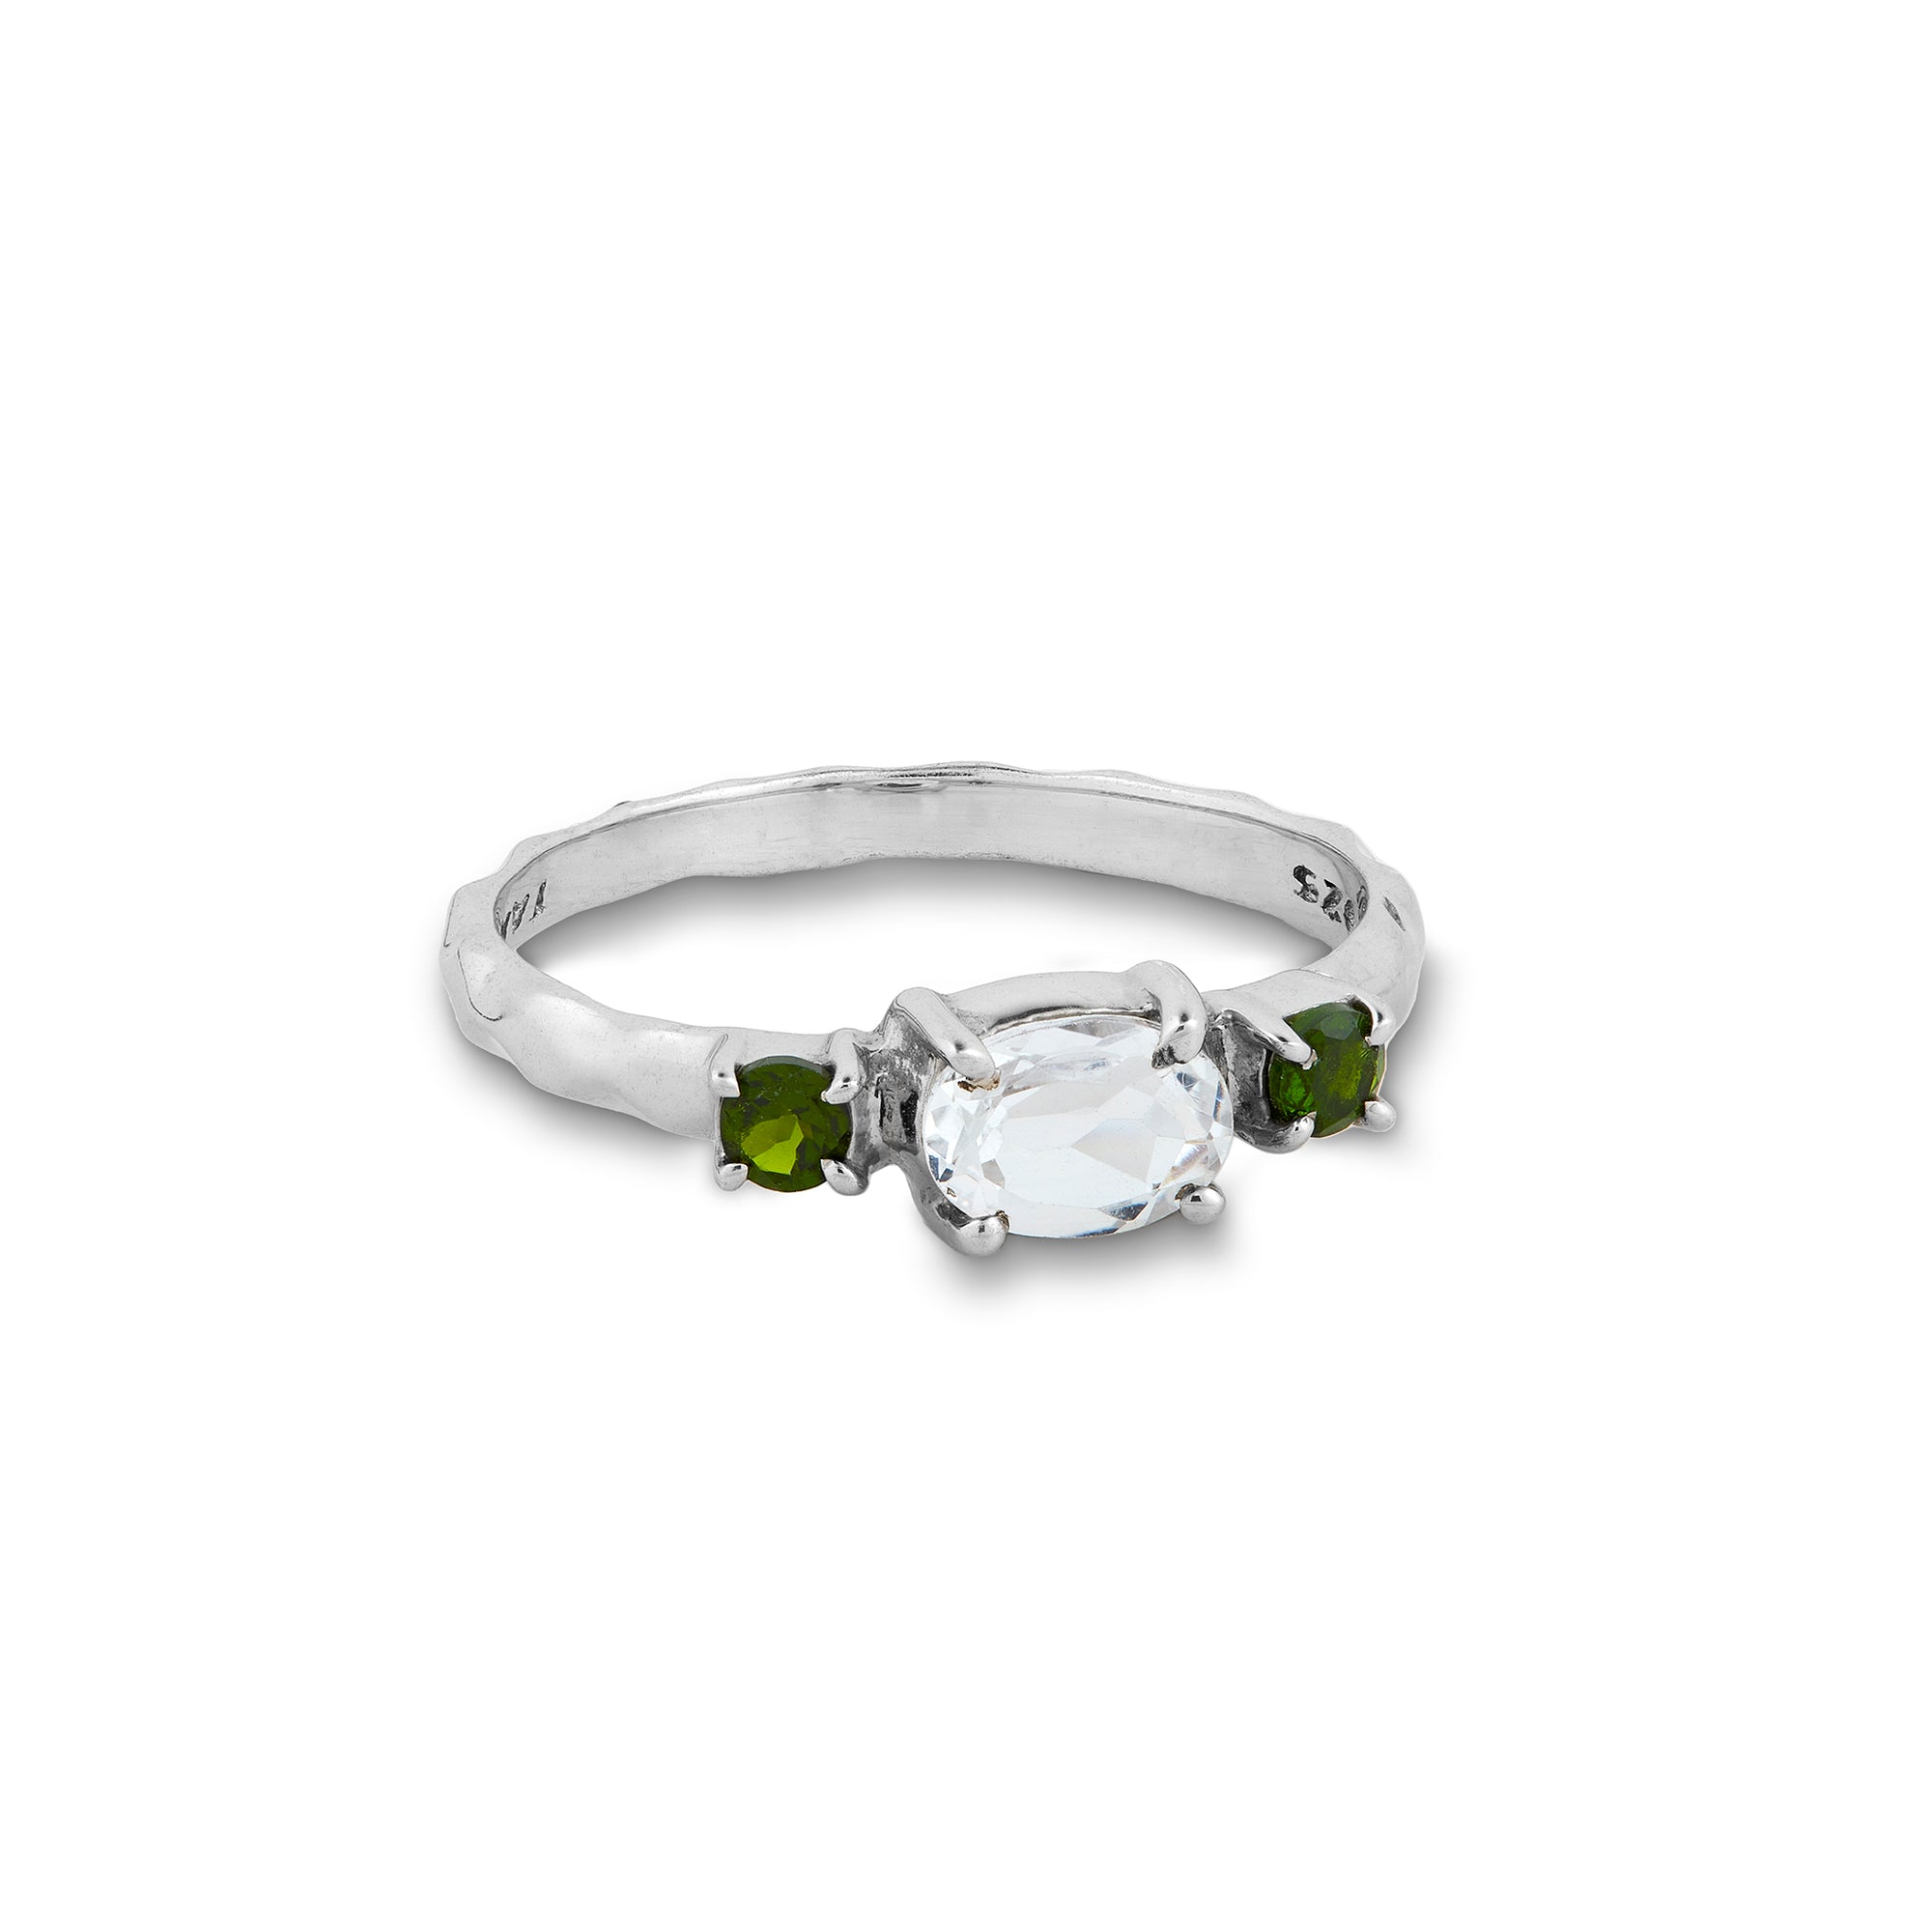 White Topaz and Chrome Diopside Ring